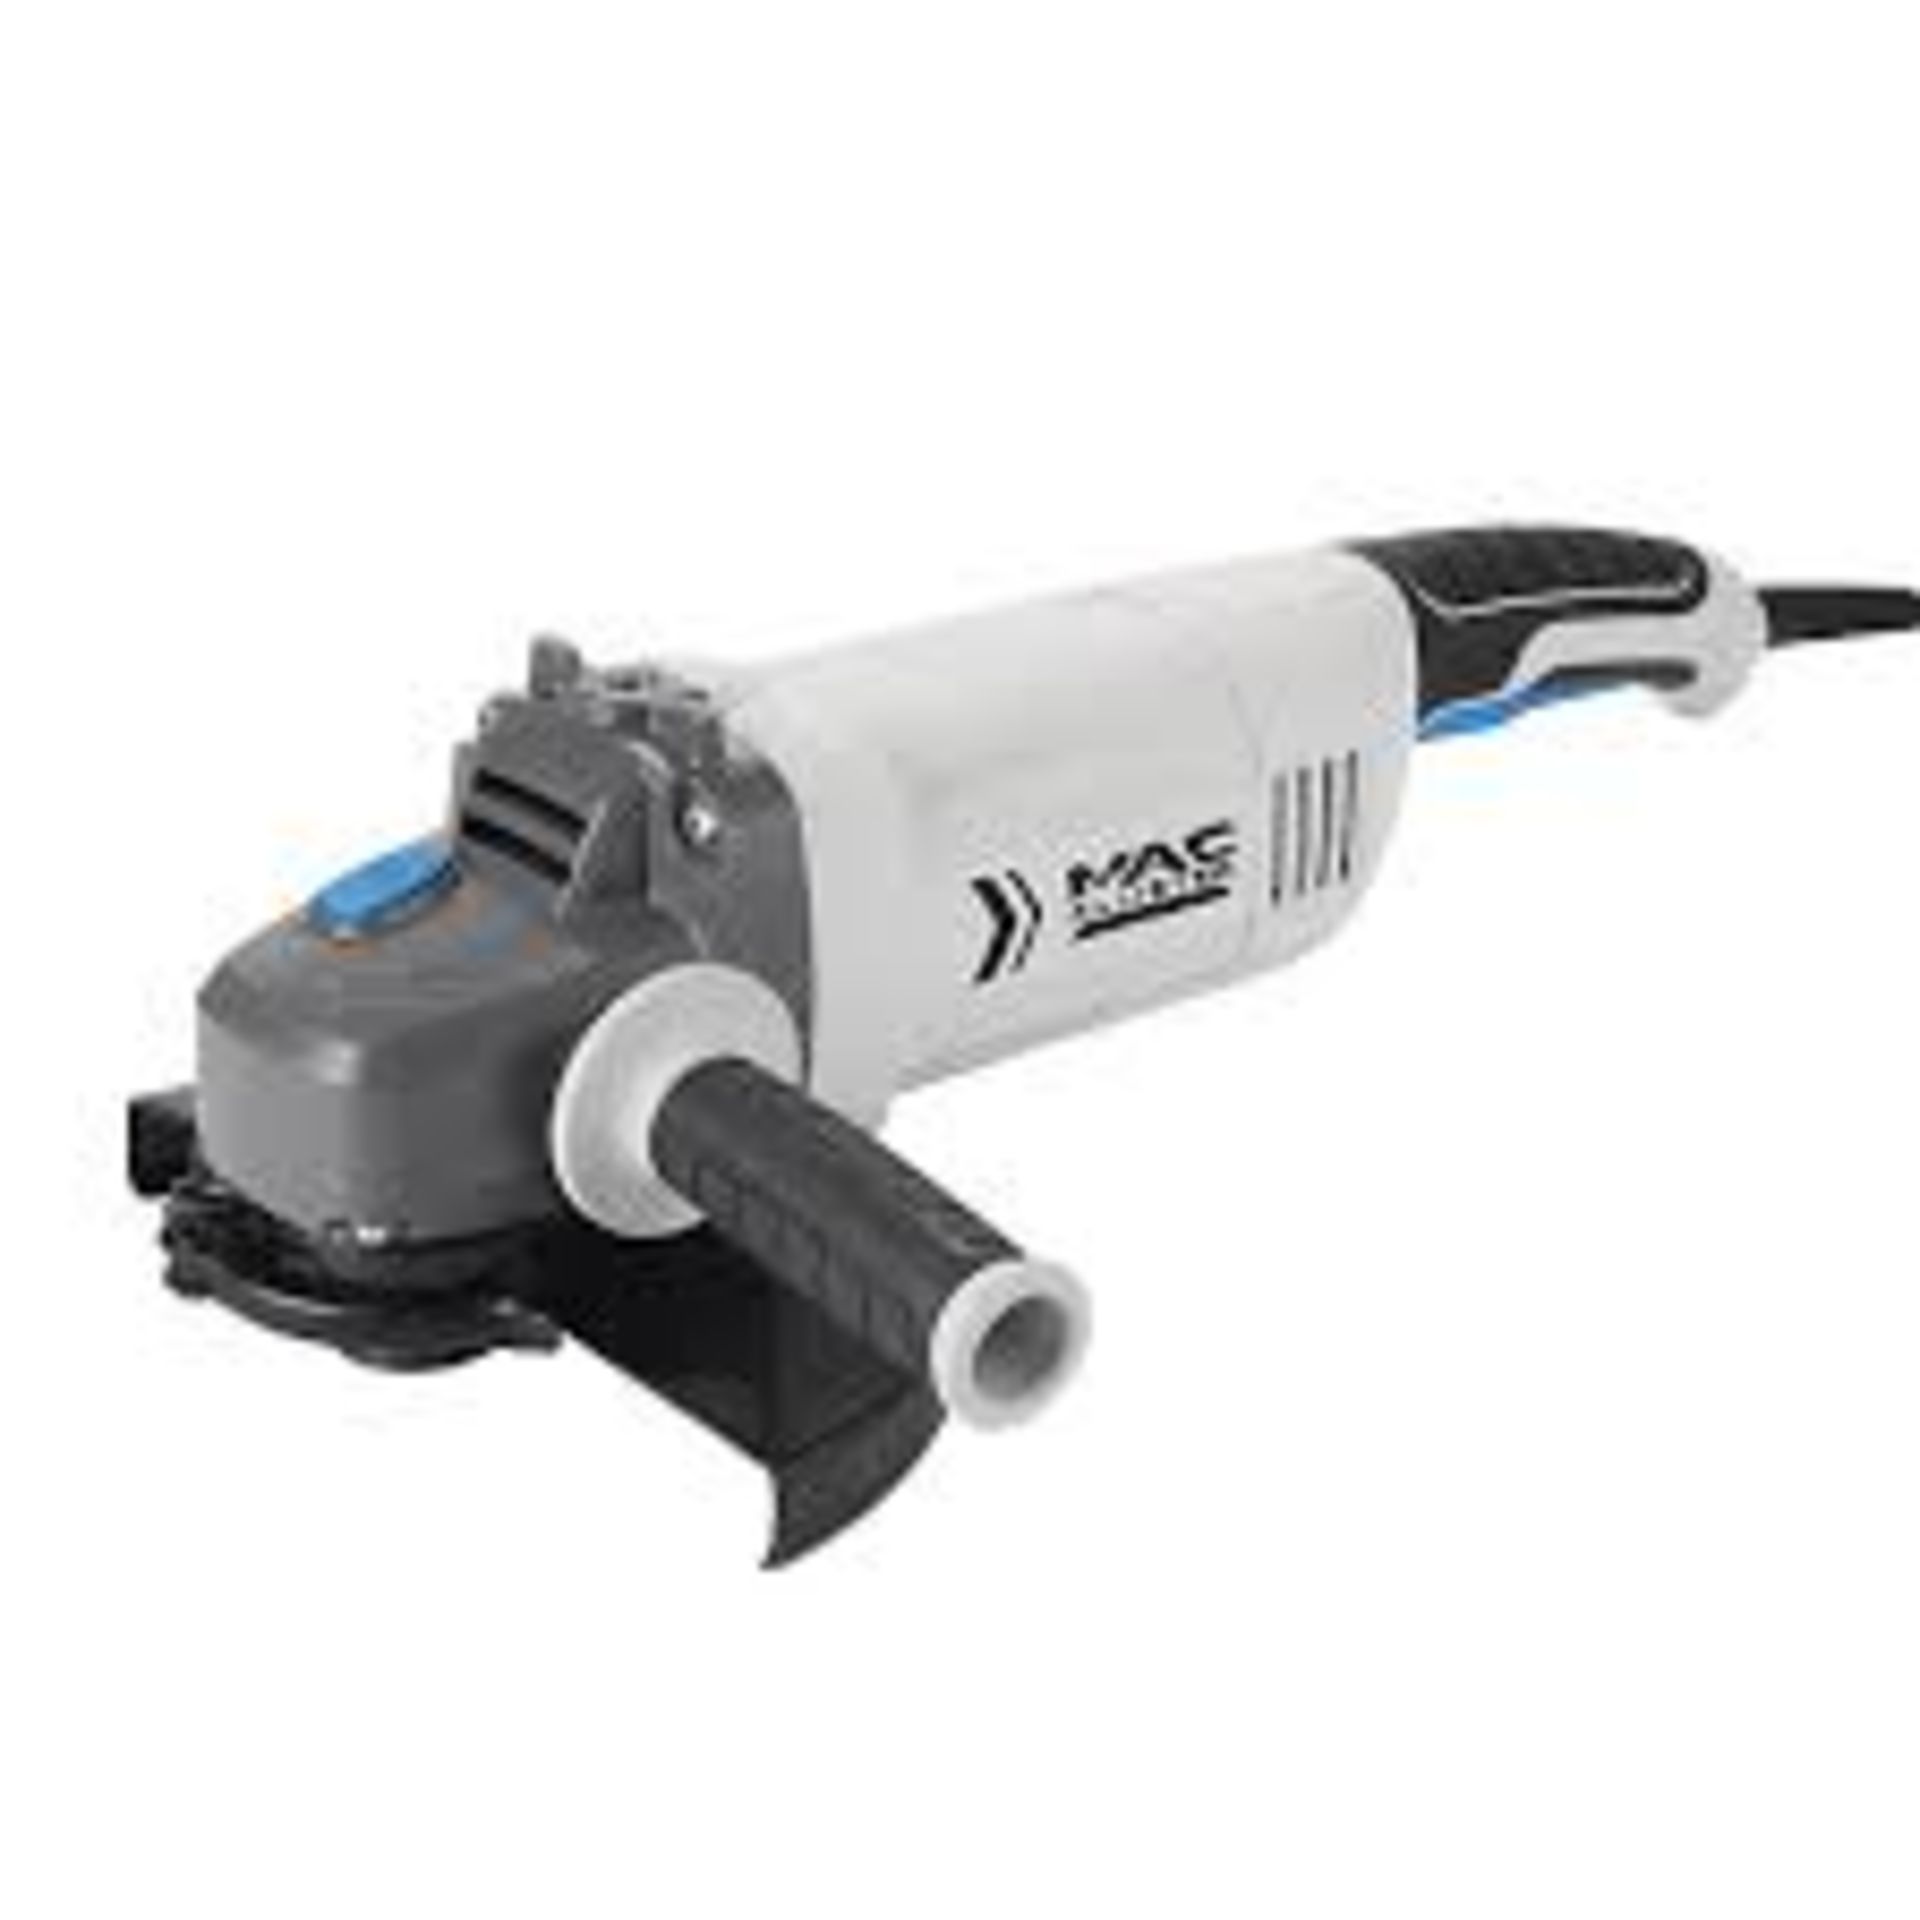 Mac Allister 2000W 240V 230mm Corded Angle grinder 2575. - PW. Powerful 2000W Mac Allister Angle